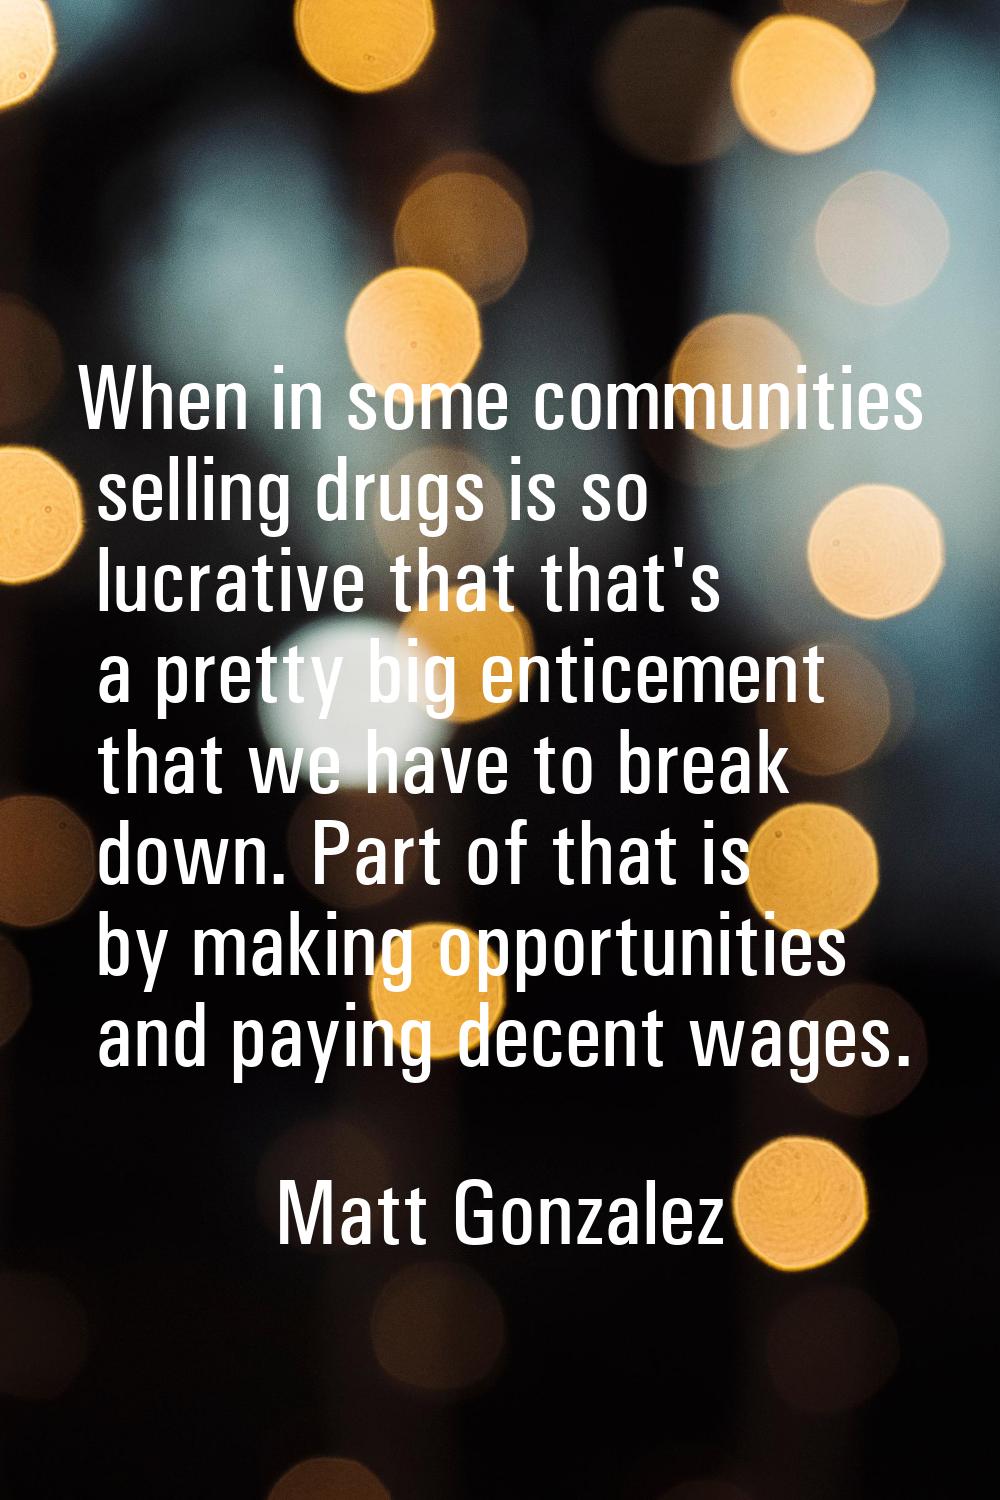 When in some communities selling drugs is so lucrative that that's a pretty big enticement that we 